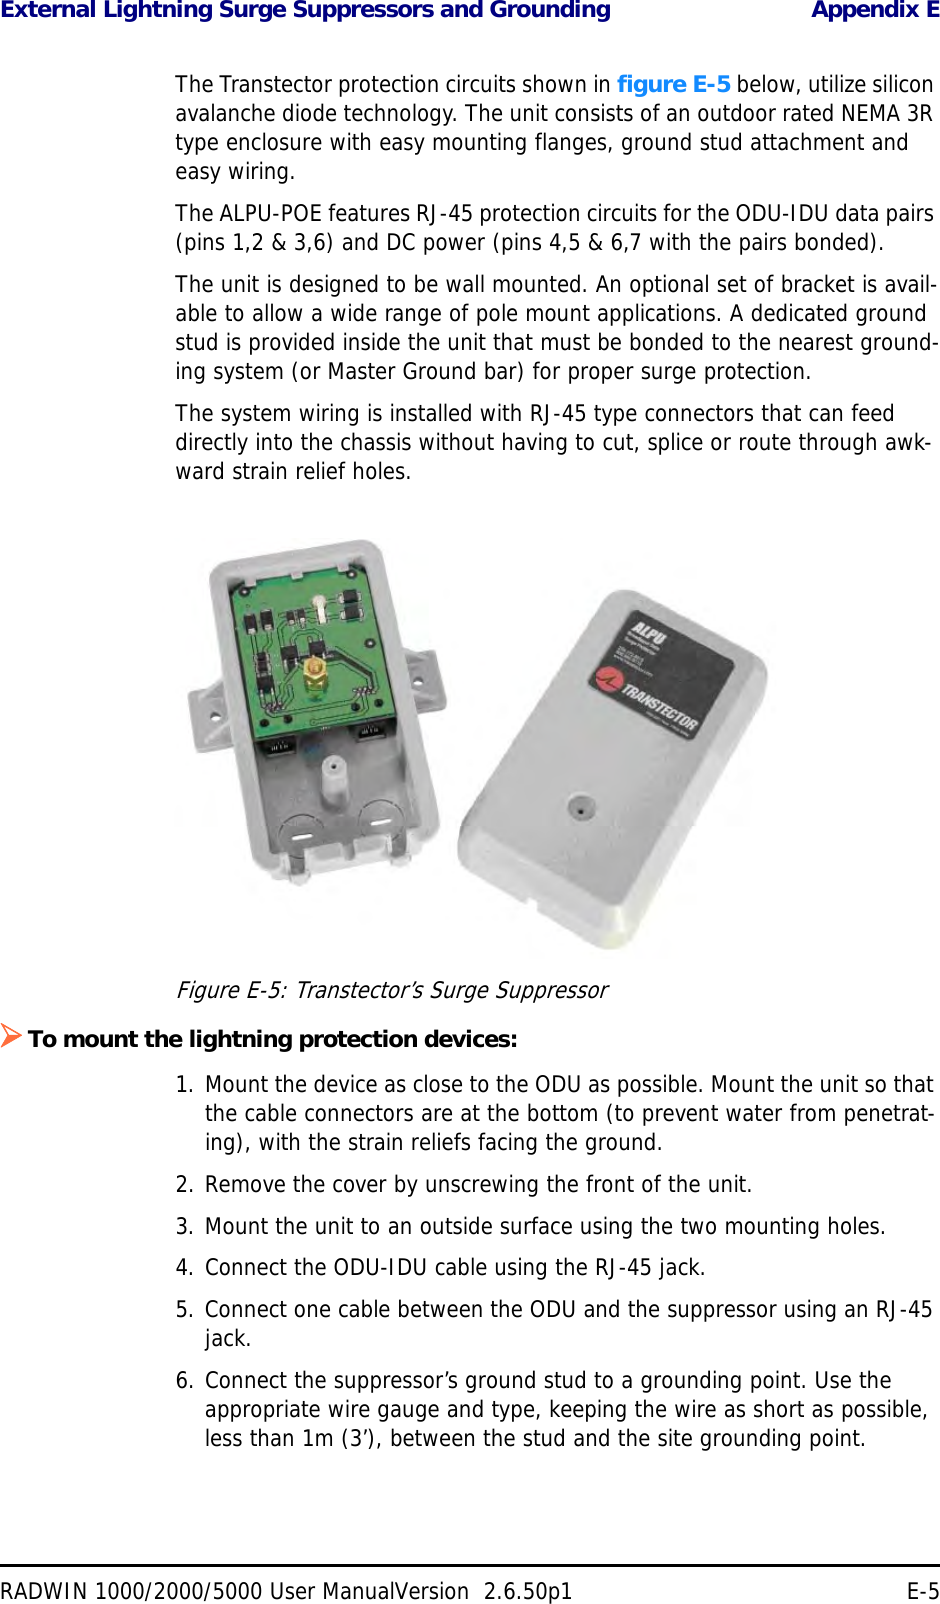 External Lightning Surge Suppressors and Grounding Appendix ERADWIN 1000/2000/5000 User ManualVersion  2.6.50p1 E-5The Transtector protection circuits shown in figure E-5 below, utilize silicon avalanche diode technology. The unit consists of an outdoor rated NEMA 3R type enclosure with easy mounting flanges, ground stud attachment and easy wiring.The ALPU-POE features RJ-45 protection circuits for the ODU-IDU data pairs (pins 1,2 &amp; 3,6) and DC power (pins 4,5 &amp; 6,7 with the pairs bonded).The unit is designed to be wall mounted. An optional set of bracket is avail-able to allow a wide range of pole mount applications. A dedicated ground stud is provided inside the unit that must be bonded to the nearest ground-ing system (or Master Ground bar) for proper surge protection.The system wiring is installed with RJ-45 type connectors that can feed directly into the chassis without having to cut, splice or route through awk-ward strain relief holes.Figure E-5: Transtector’s Surge SuppressorTo mount the lightning protection devices:1. Mount the device as close to the ODU as possible. Mount the unit so that the cable connectors are at the bottom (to prevent water from penetrat-ing), with the strain reliefs facing the ground.2. Remove the cover by unscrewing the front of the unit.3. Mount the unit to an outside surface using the two mounting holes.4. Connect the ODU-IDU cable using the RJ-45 jack.5. Connect one cable between the ODU and the suppressor using an RJ-45 jack.6. Connect the suppressor’s ground stud to a grounding point. Use the appropriate wire gauge and type, keeping the wire as short as possible, less than 1m (3’), between the stud and the site grounding point.